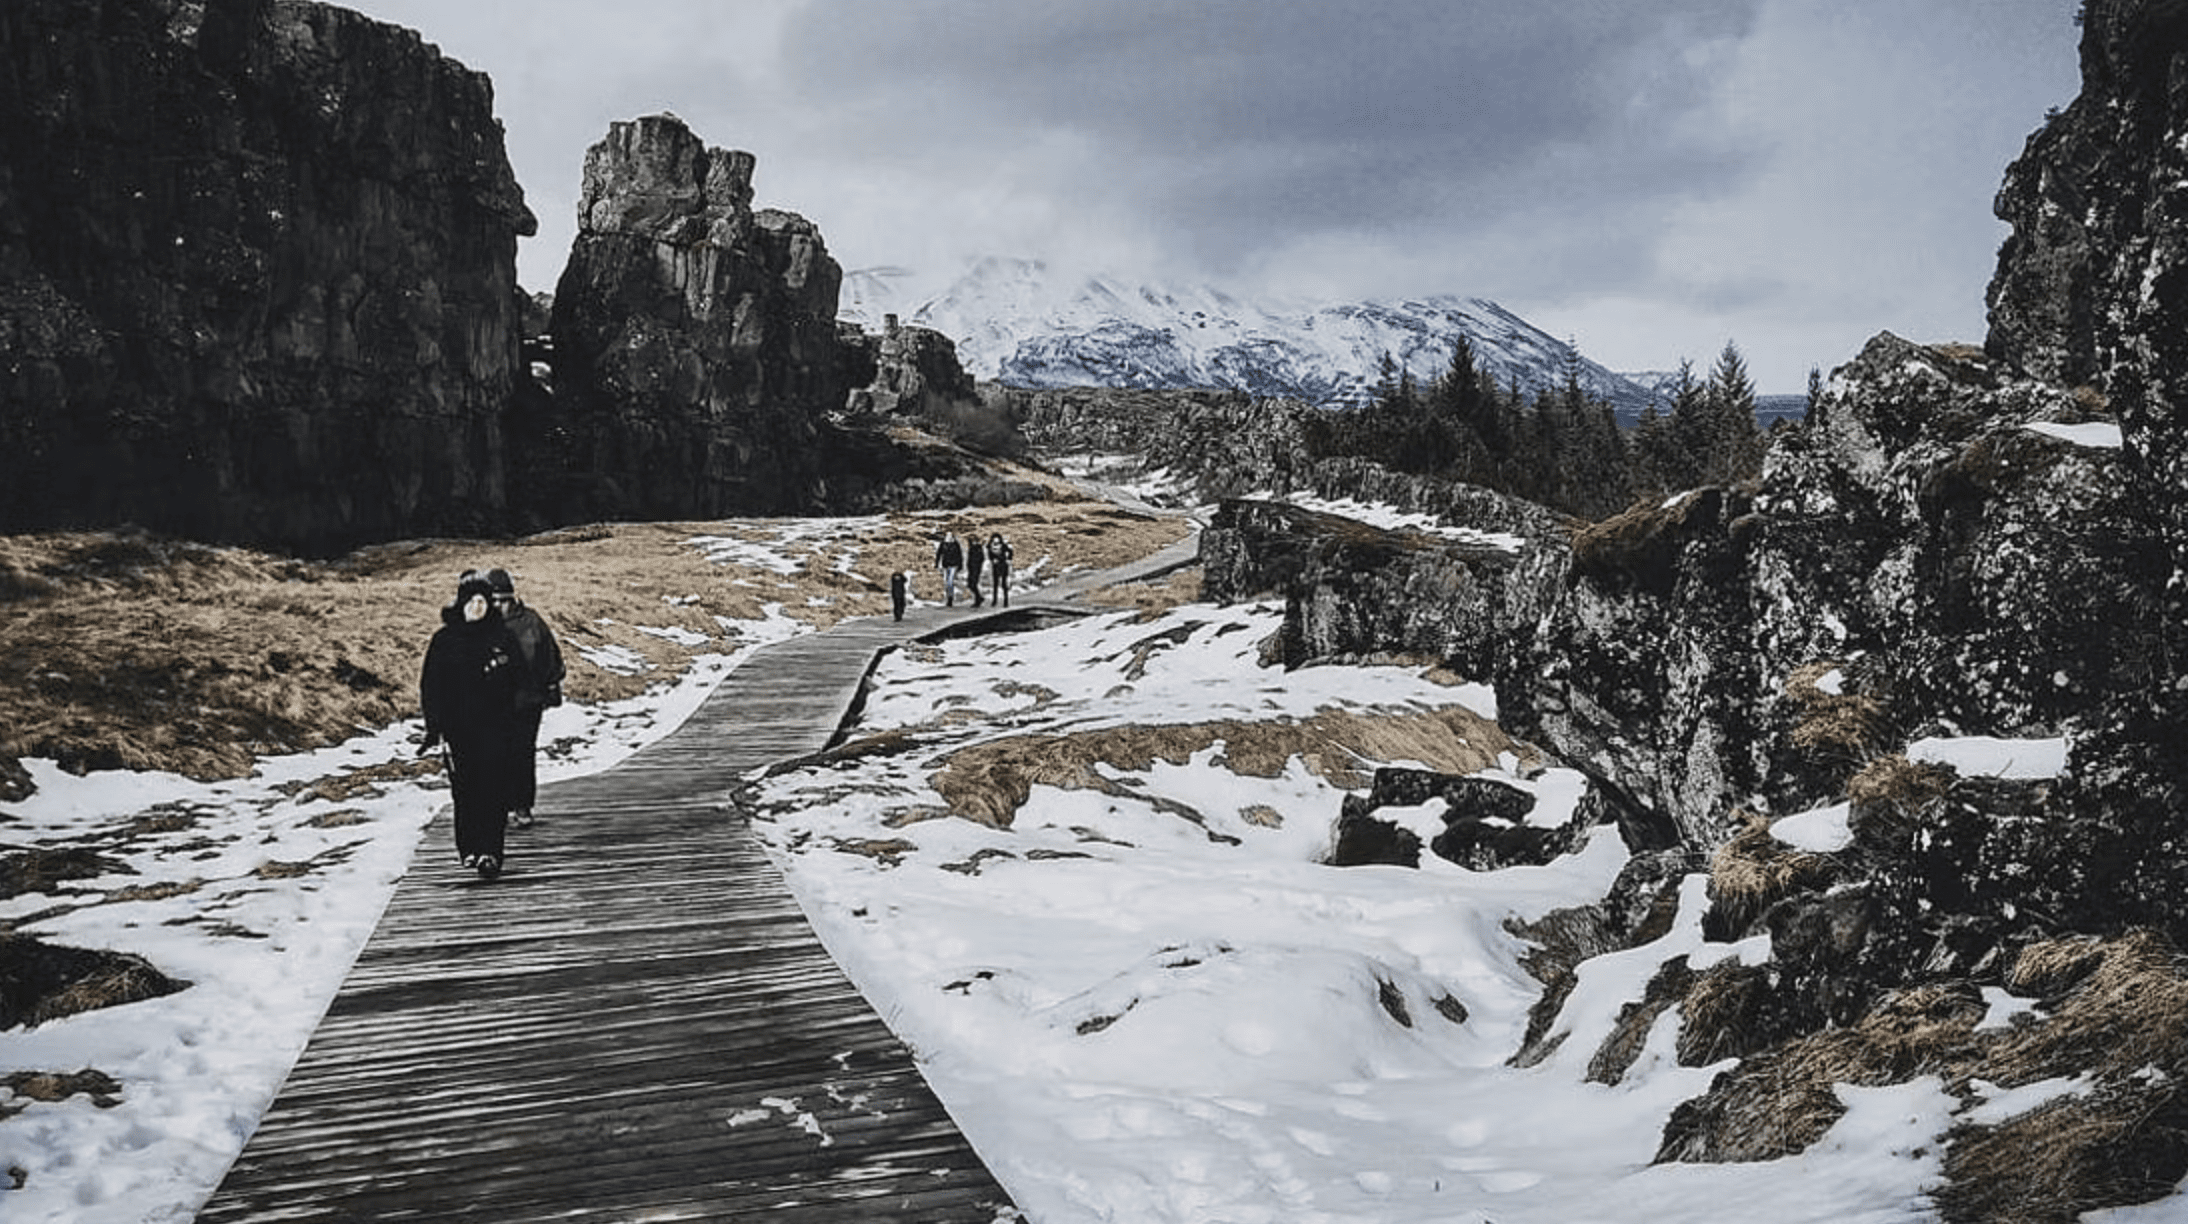 Thingvellir National Park is one of the most important attractions in the Golden Circle in Iceland